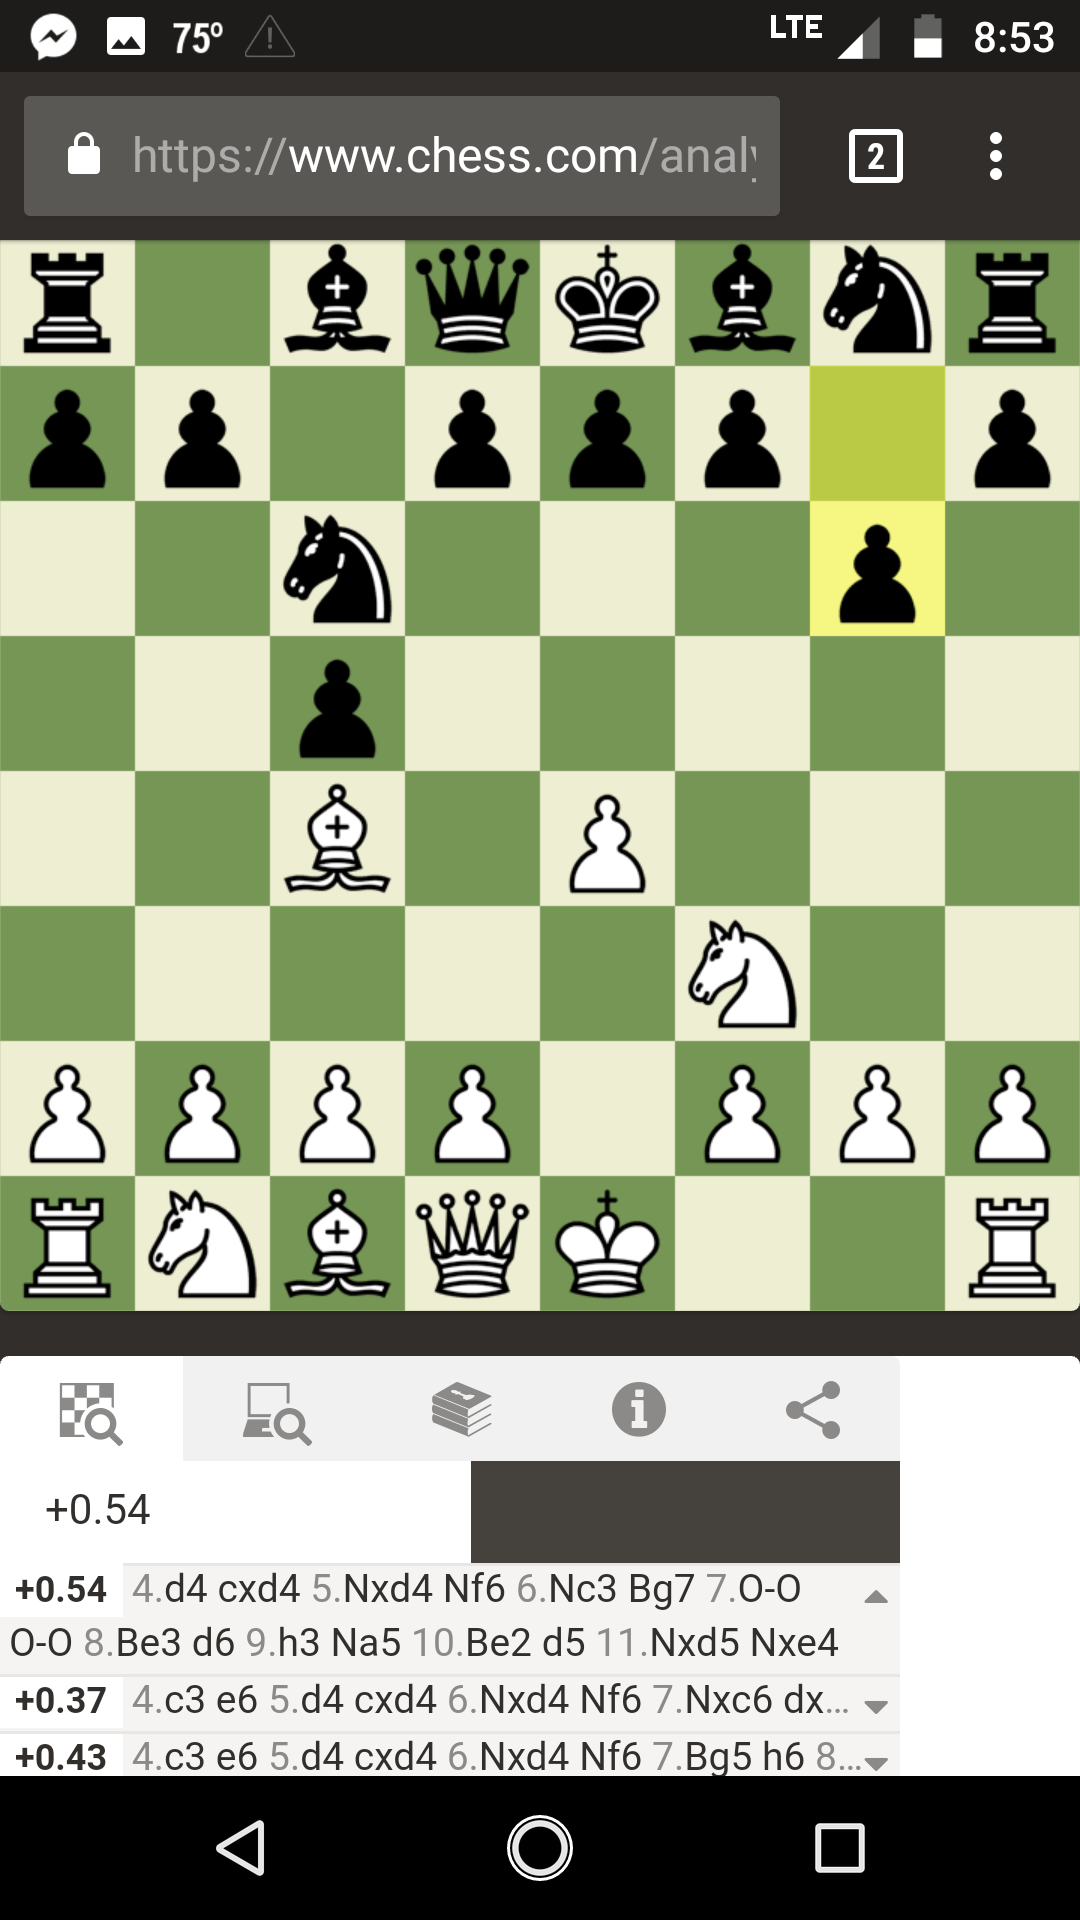 Why Bowdler attack against Sicilian is a mistake! 